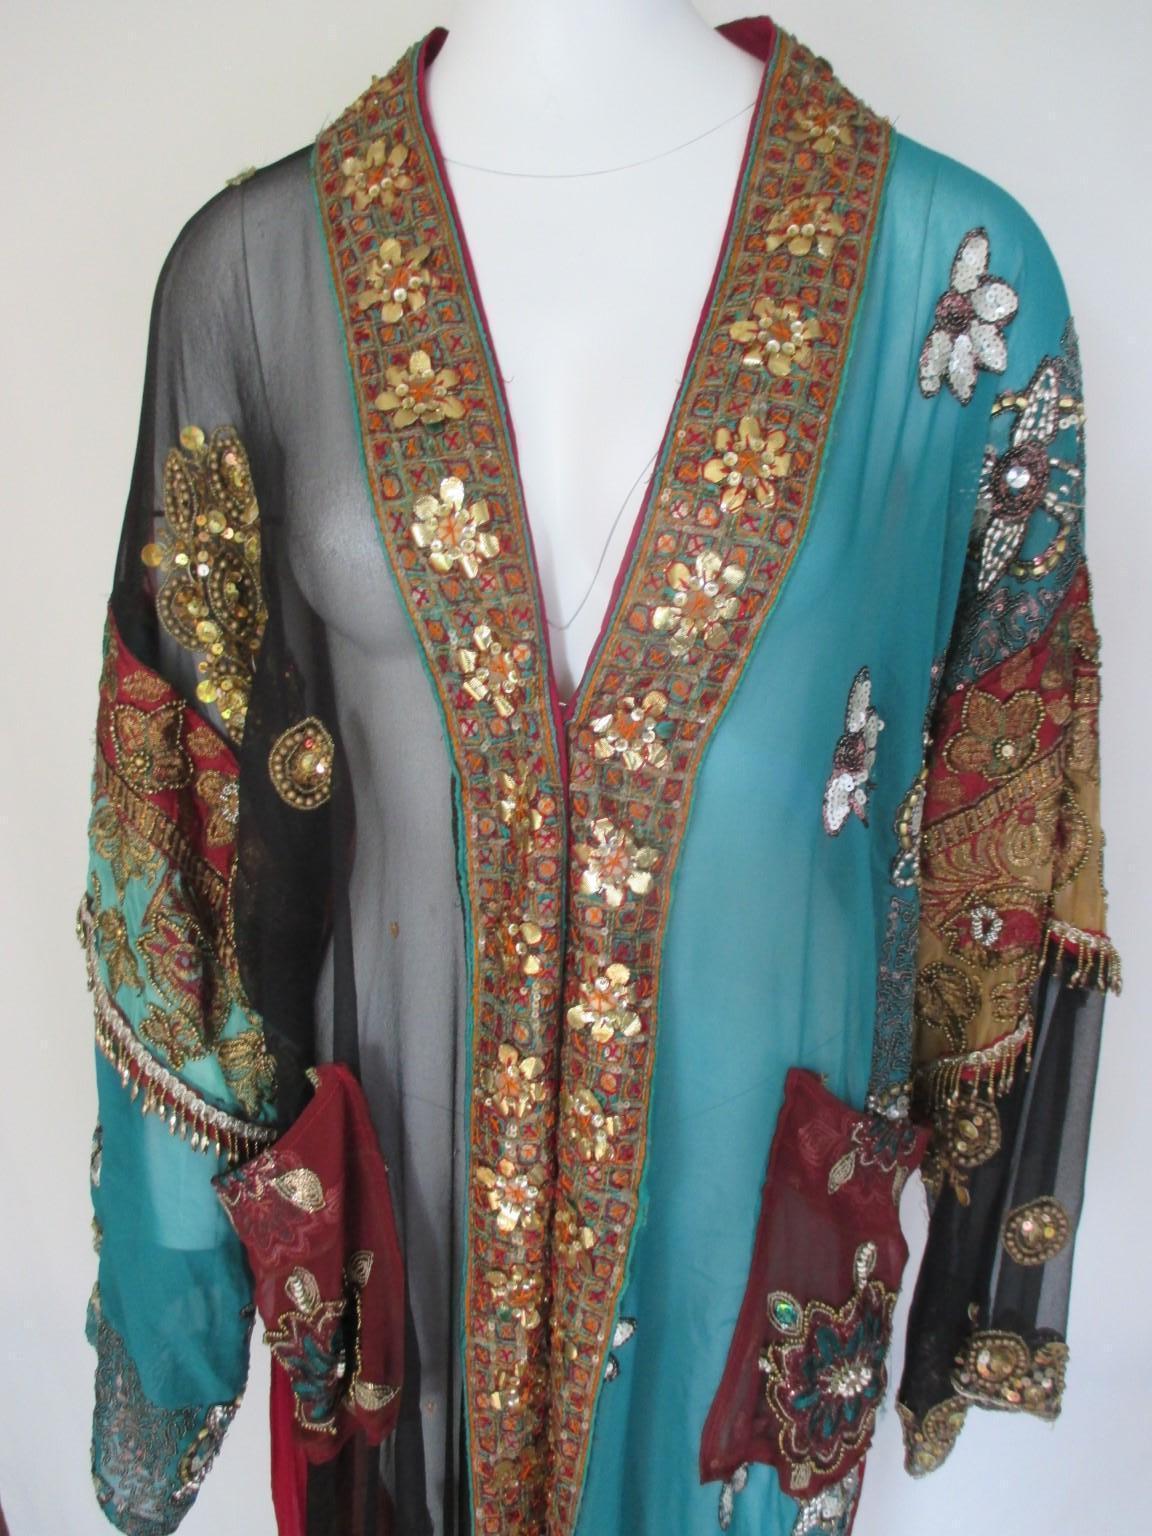 Unique hand made one- off a kind vintage colorful robe manteau.

We offer more excluisive items, view our frontstore

 Embroidered with sequins and vintage Indian pieces gold brocade , 2 pockets and a matching belt.
Can be worn over jeans, bikini, a